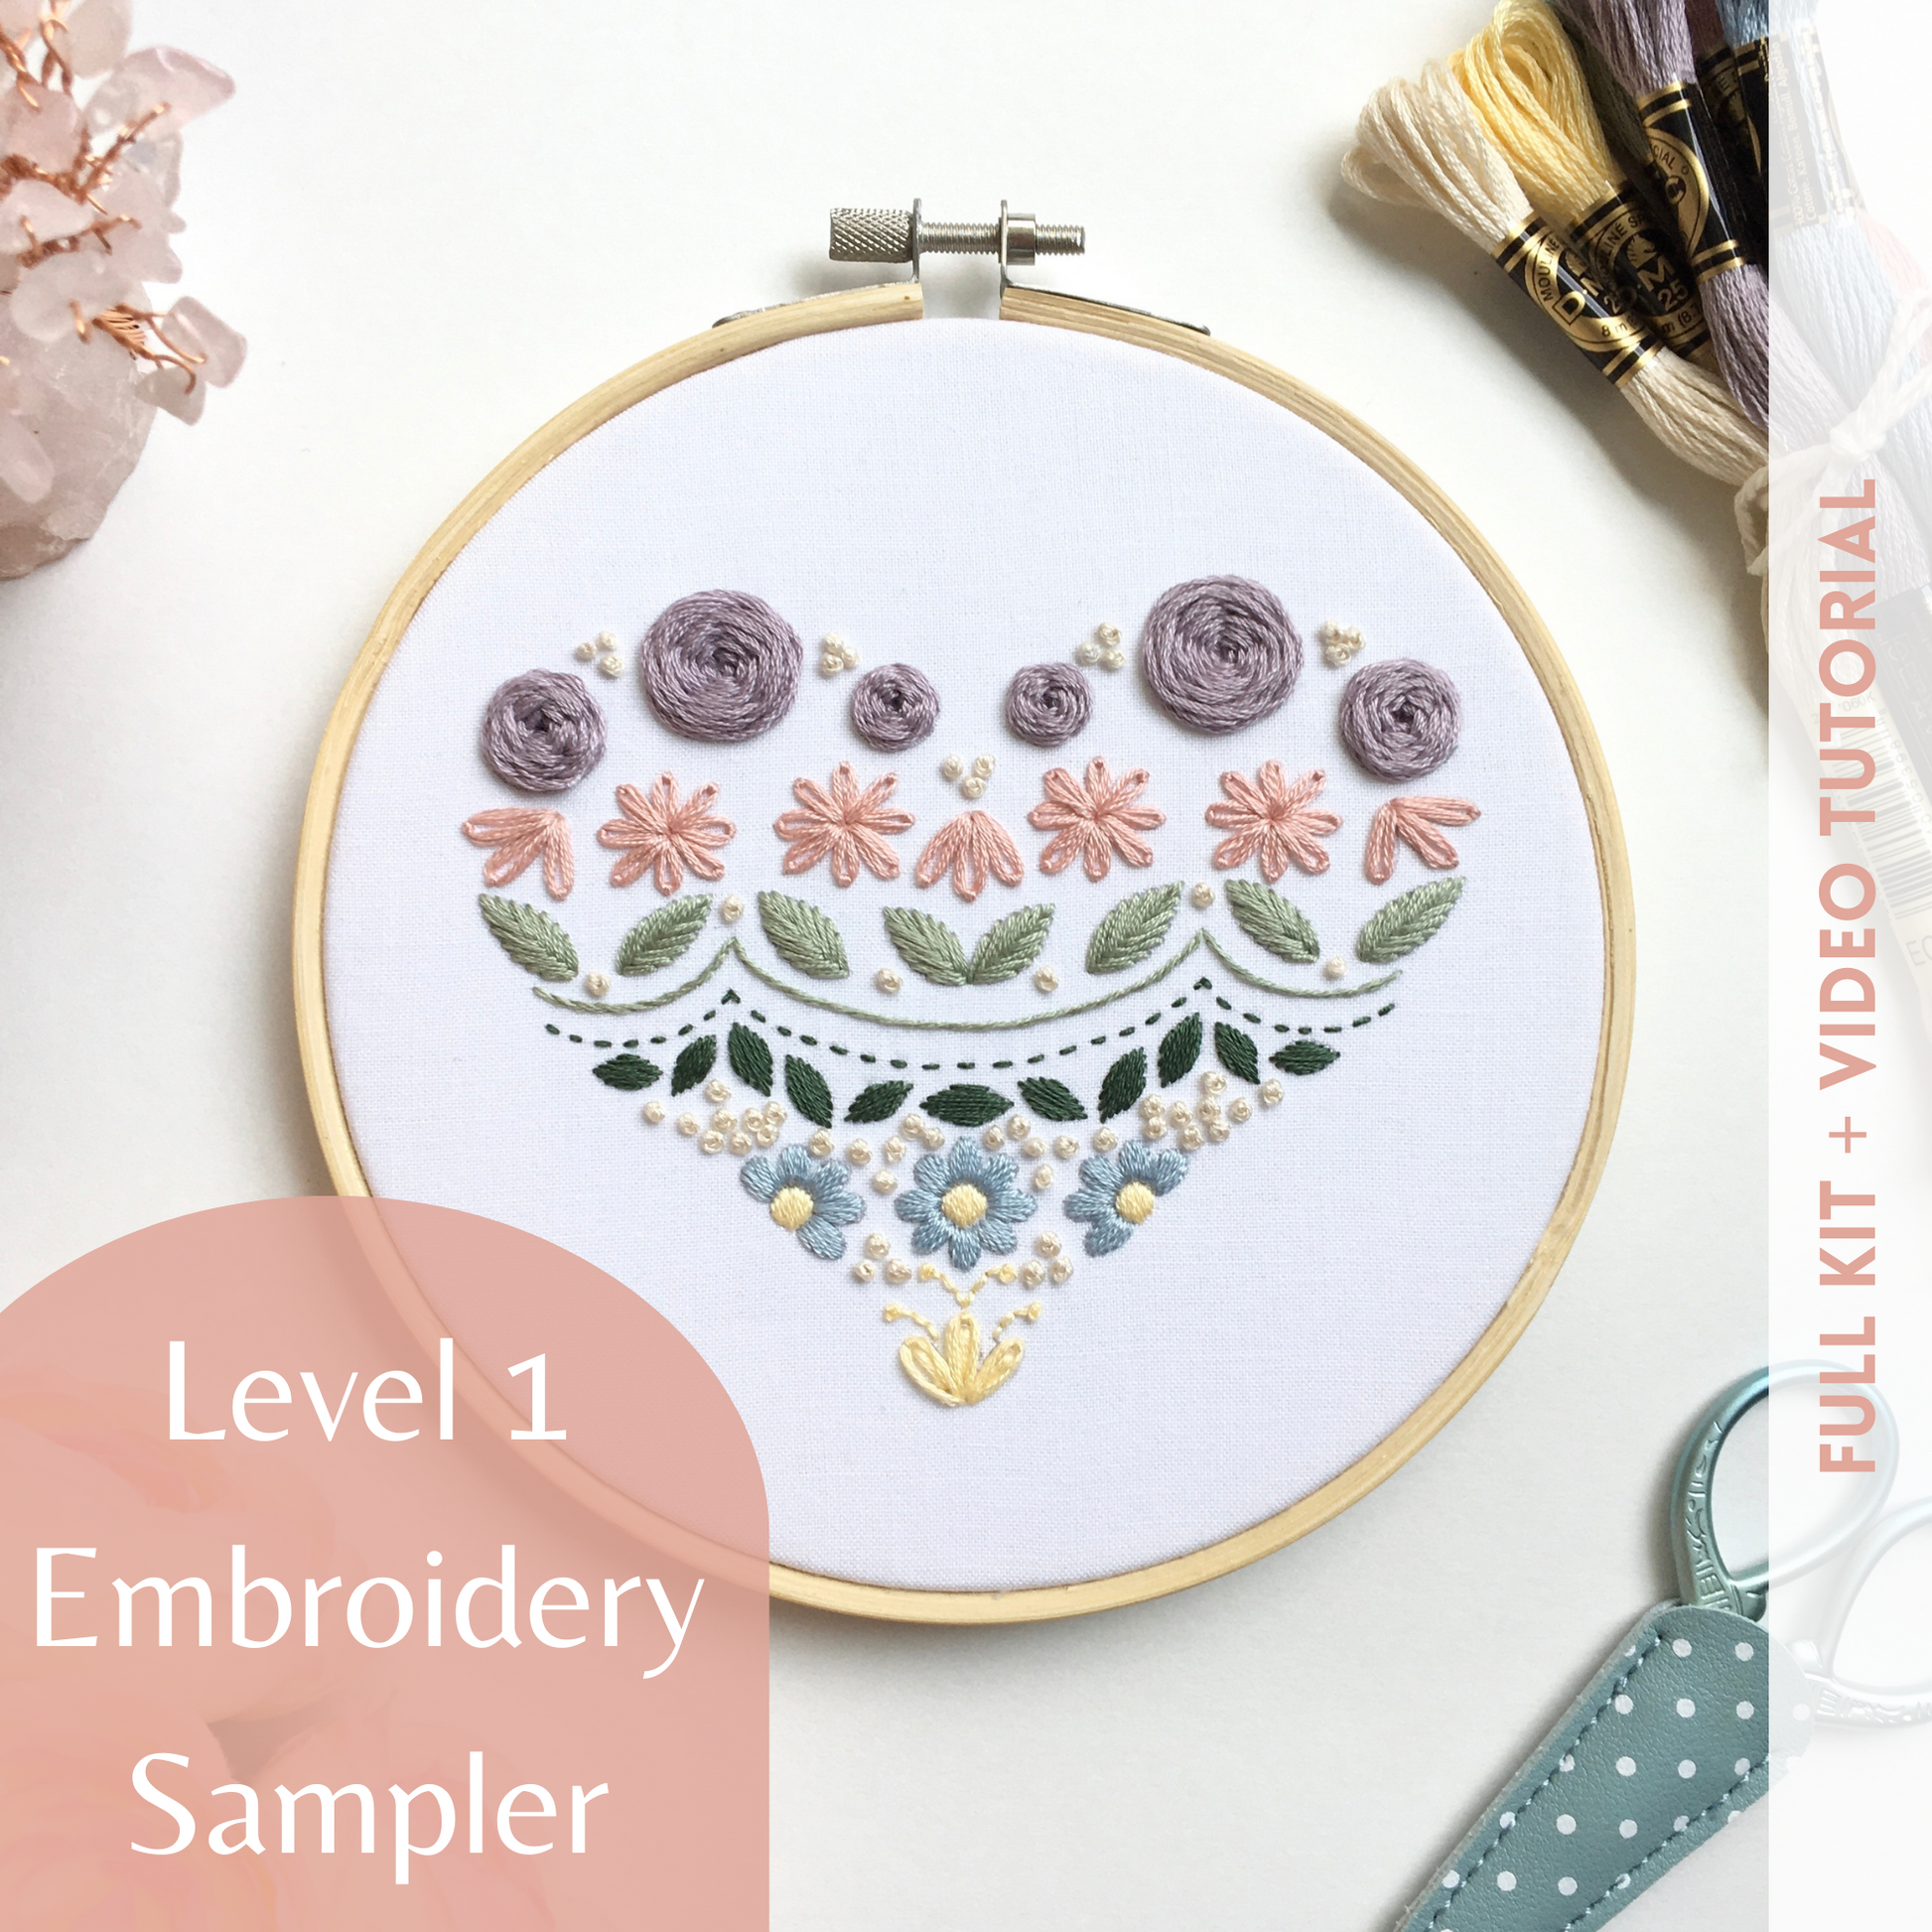 enchanting heart sampler embroidery kit by Eight22Crafts